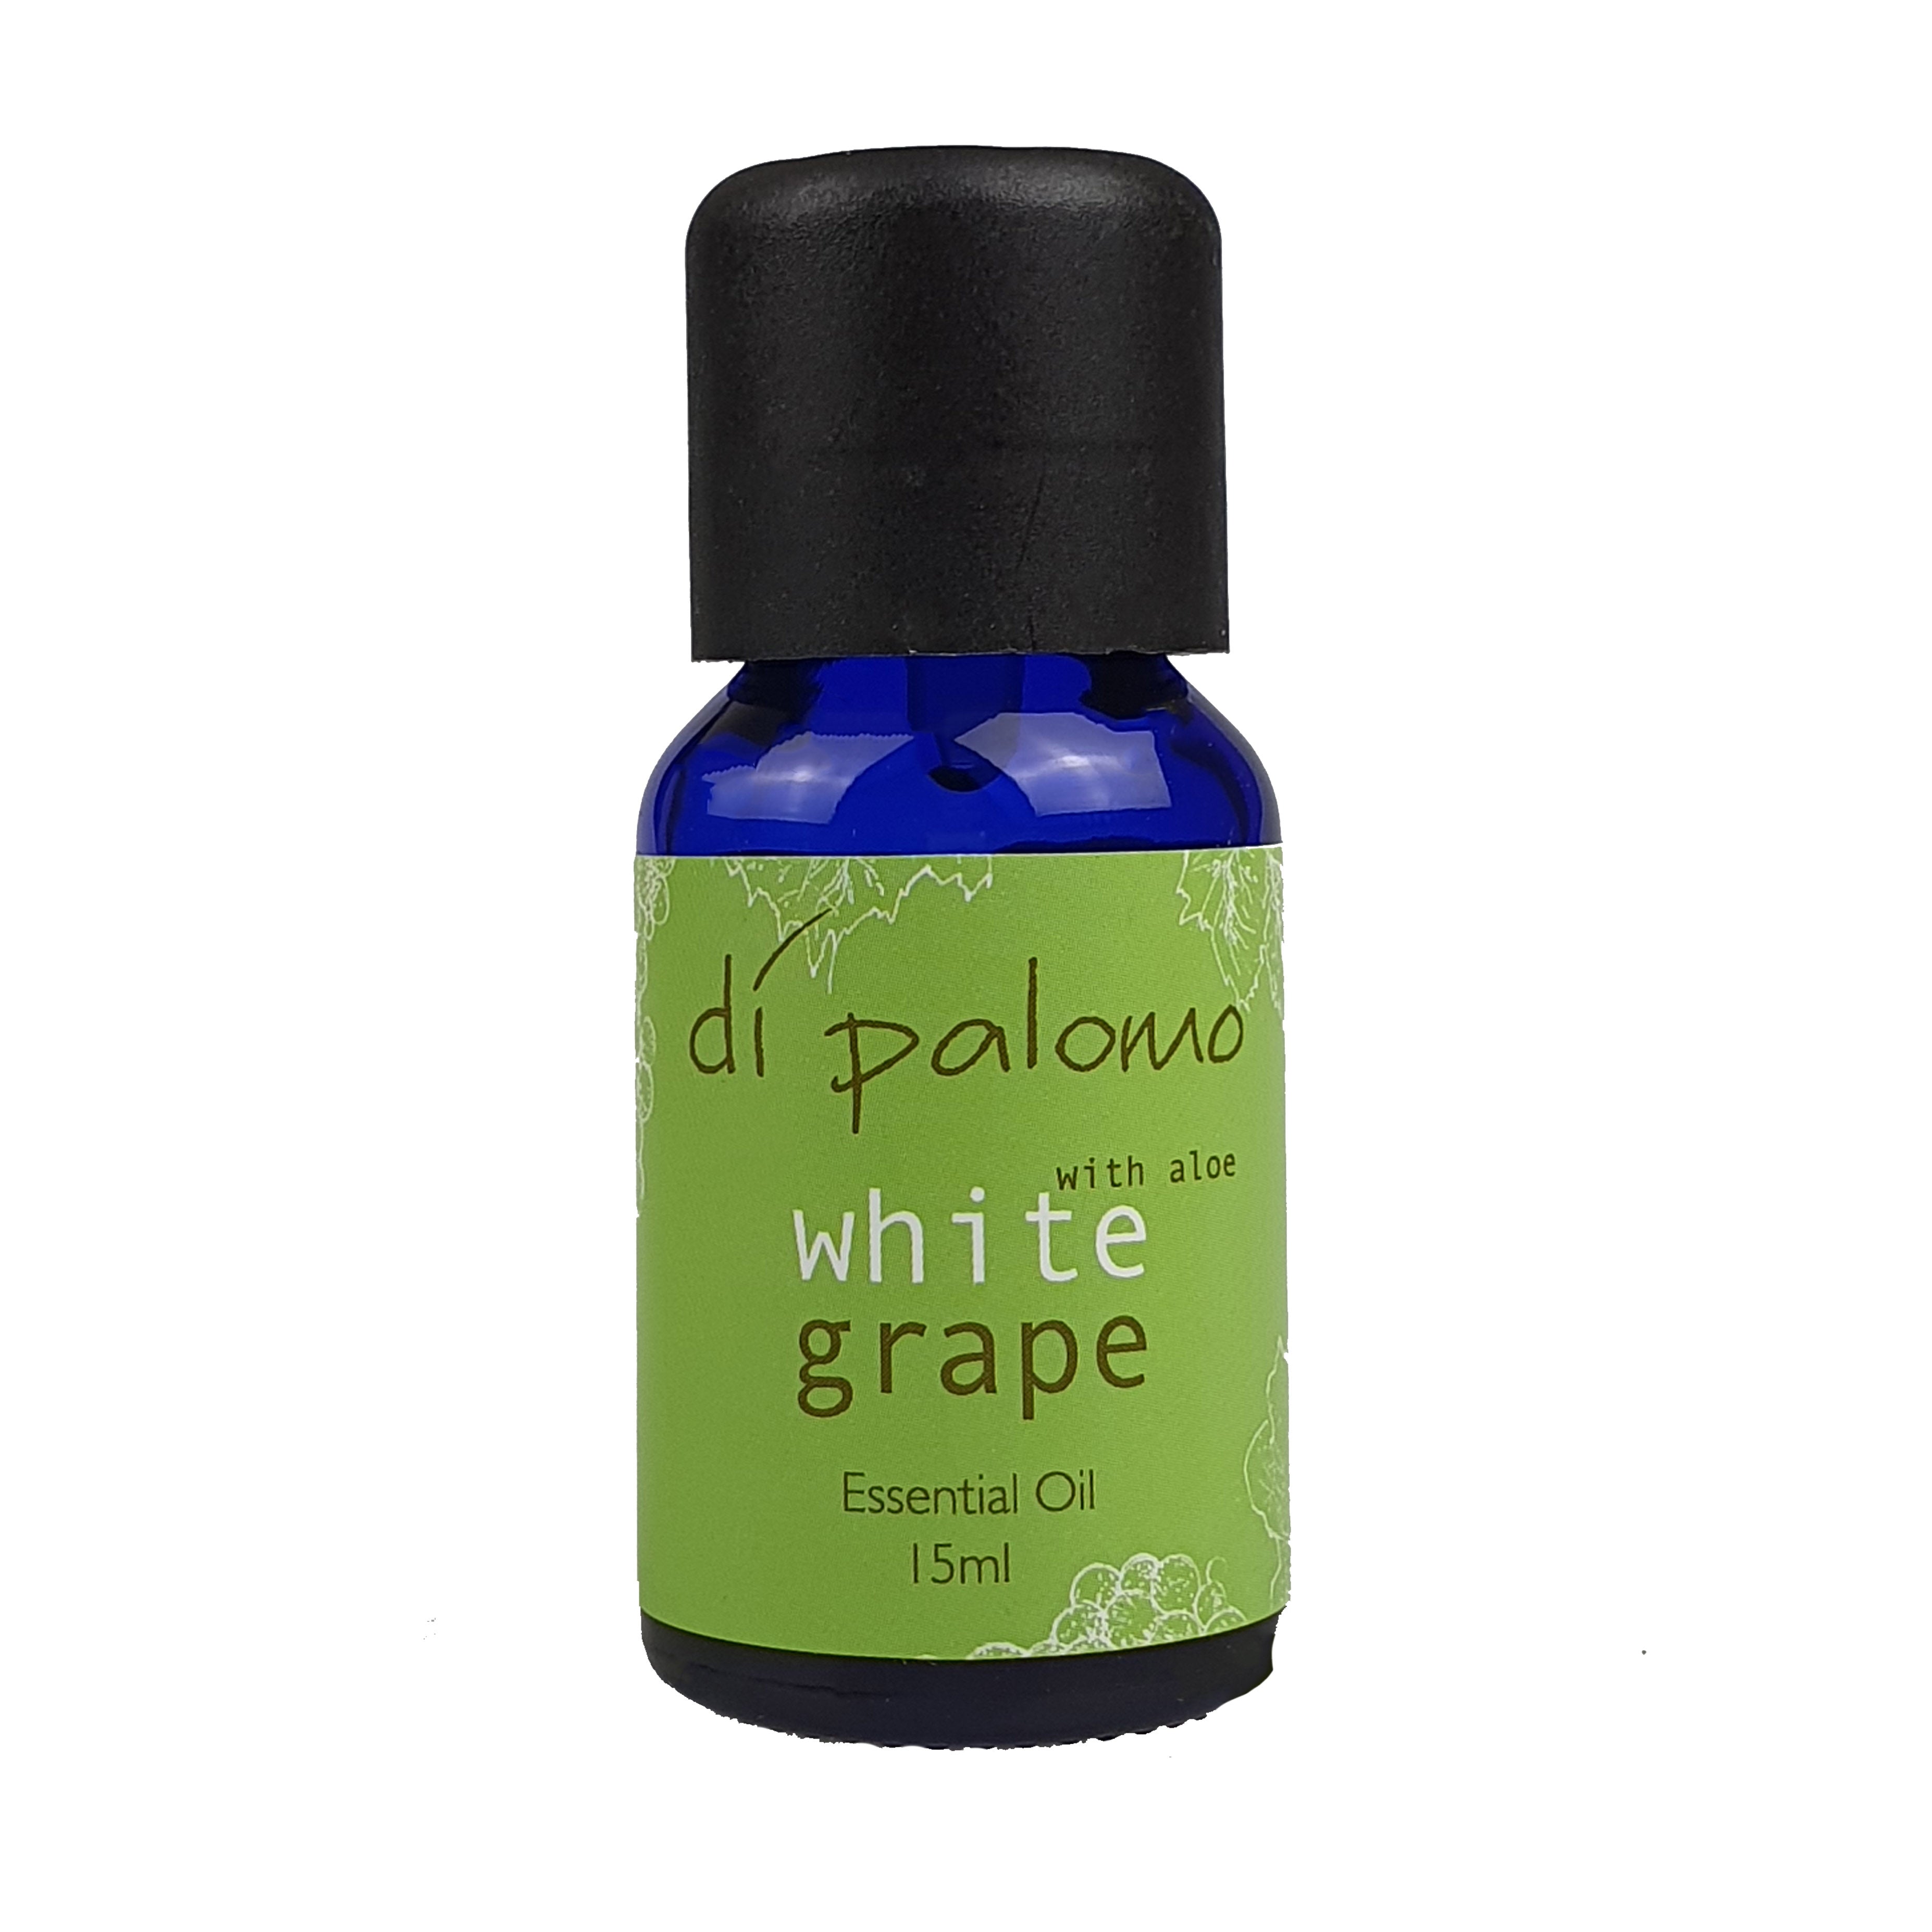 Our Essential Oil in White Grape with Aloe, with the finest fragrance oils to both fragrance your home and aid with meditation and Aromatherapy! Simply add a few drops of your chosen fragrance to the water in our diffuser and let the oils work with the fine mist to create your Italian inspired relaxation!